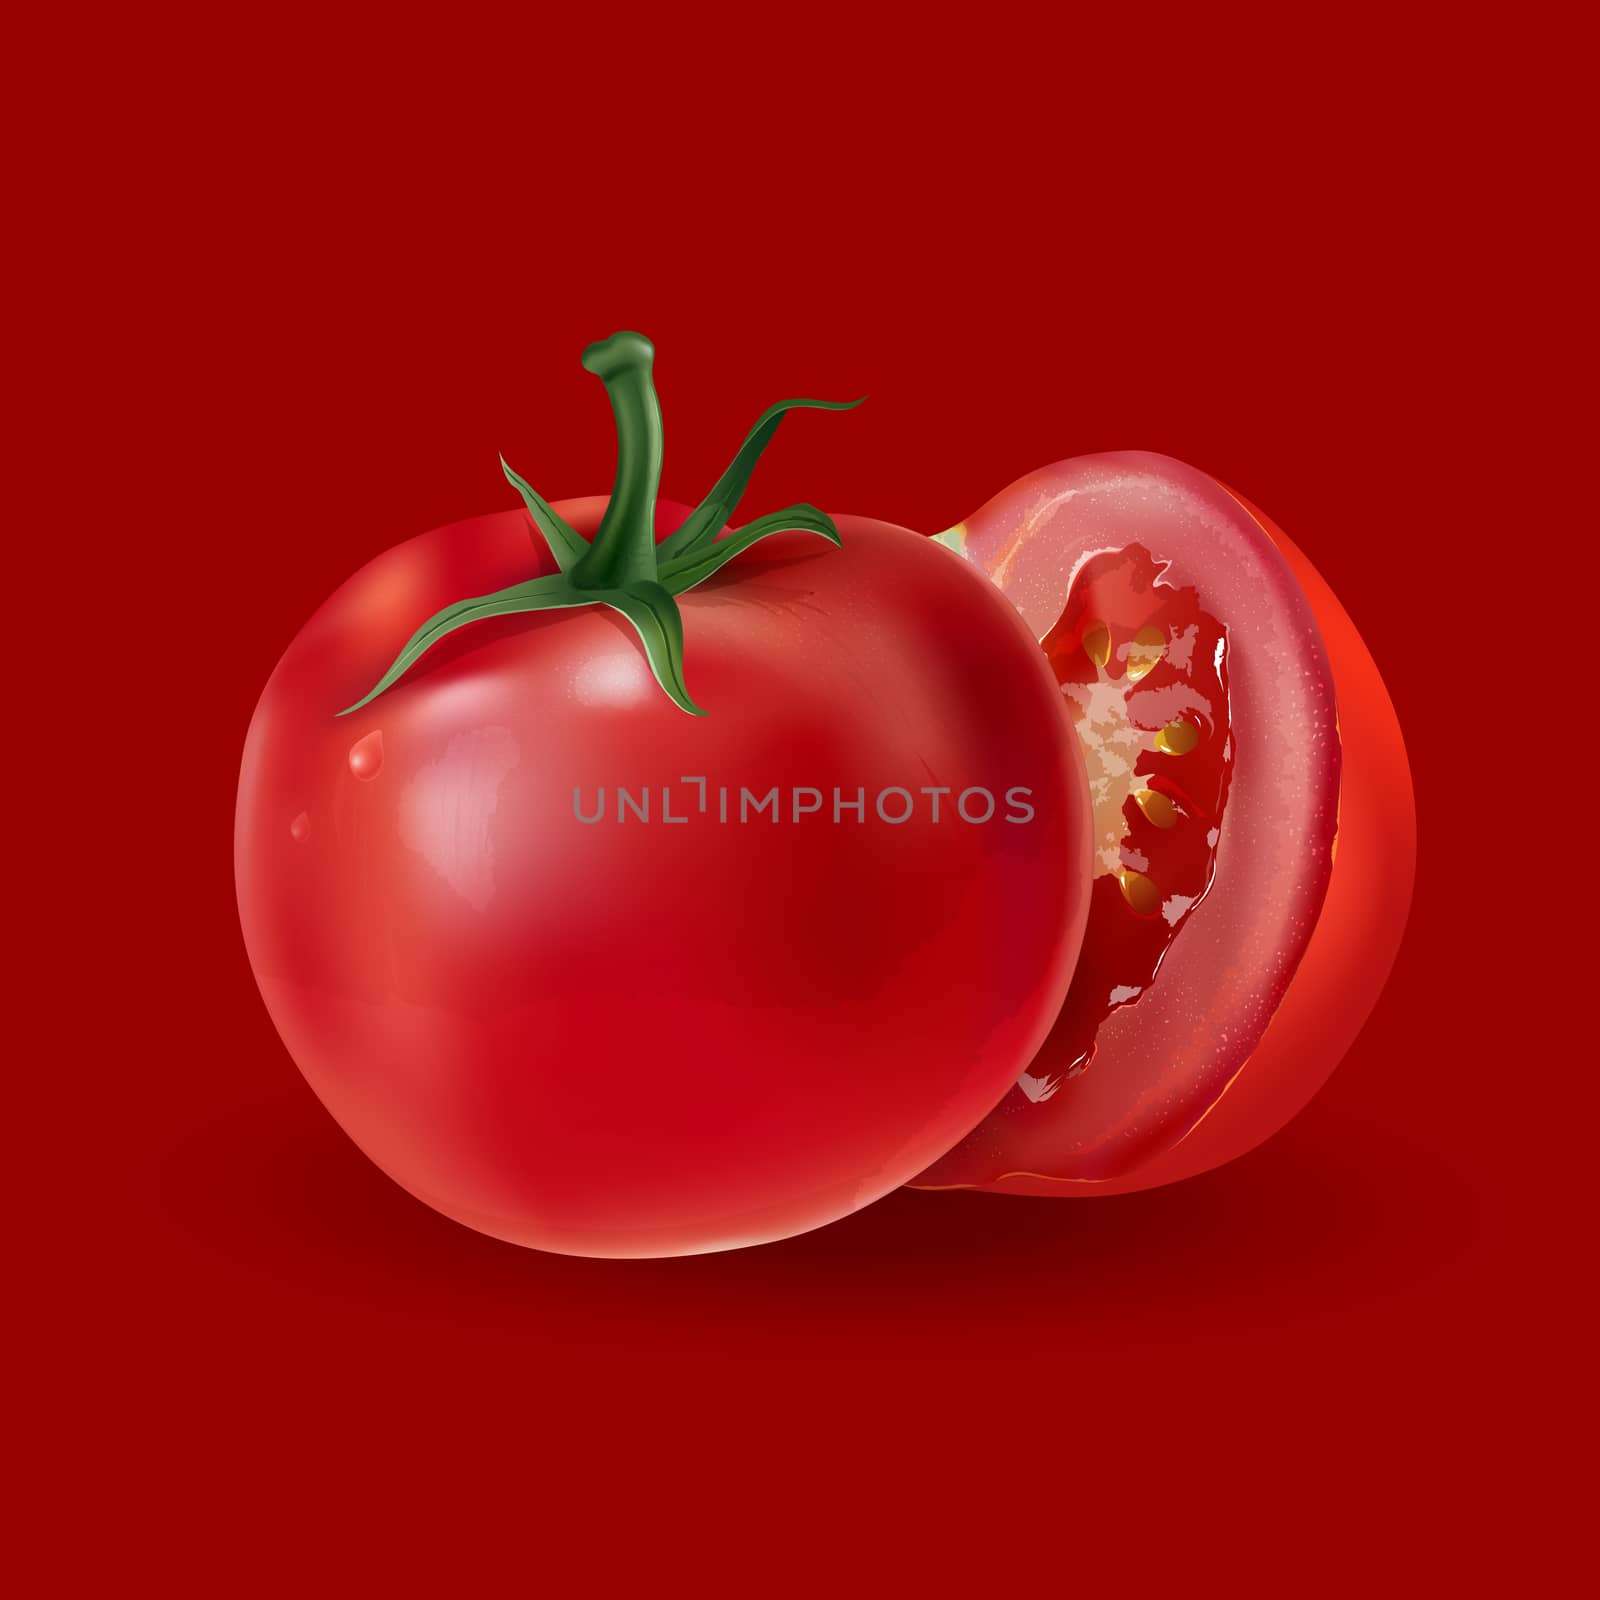 Realistic fresh tomatoes on a red background.